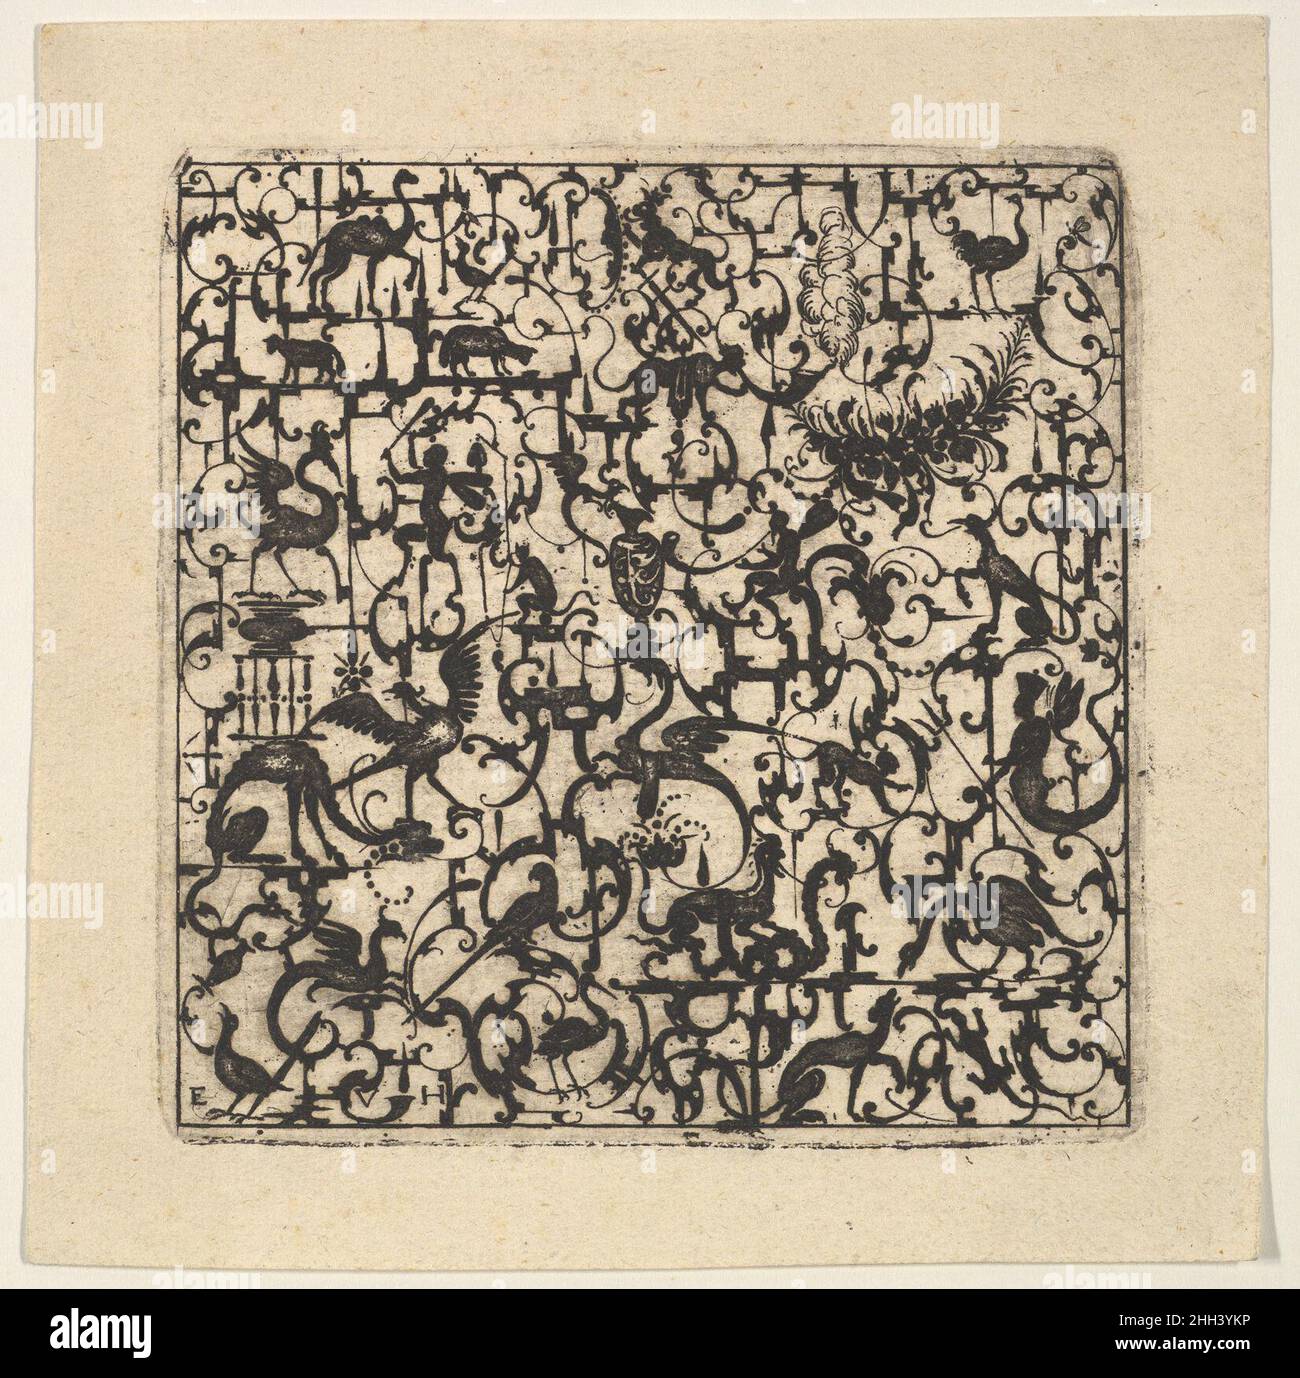 Square Blackwork Design in Silhouette Style with Schweifwerk and Grotesque Figures 1617 Esaias von Hulsen Dutch This sheet is part of a series of square grotesque designs by the goldsmith Esaias von Hulsen. The patterns he designed for this series are very complex compilations of animals, human figures and various different objects placed in a network of thin strips characterized by many C-Volutes, also known as Schweifwerk. Decorations such as these go back to Roman mural decorations, the most famous of which were to be found in the Domus Aurea in Rome. Renaissance and Baroque artists develop Stock Photo